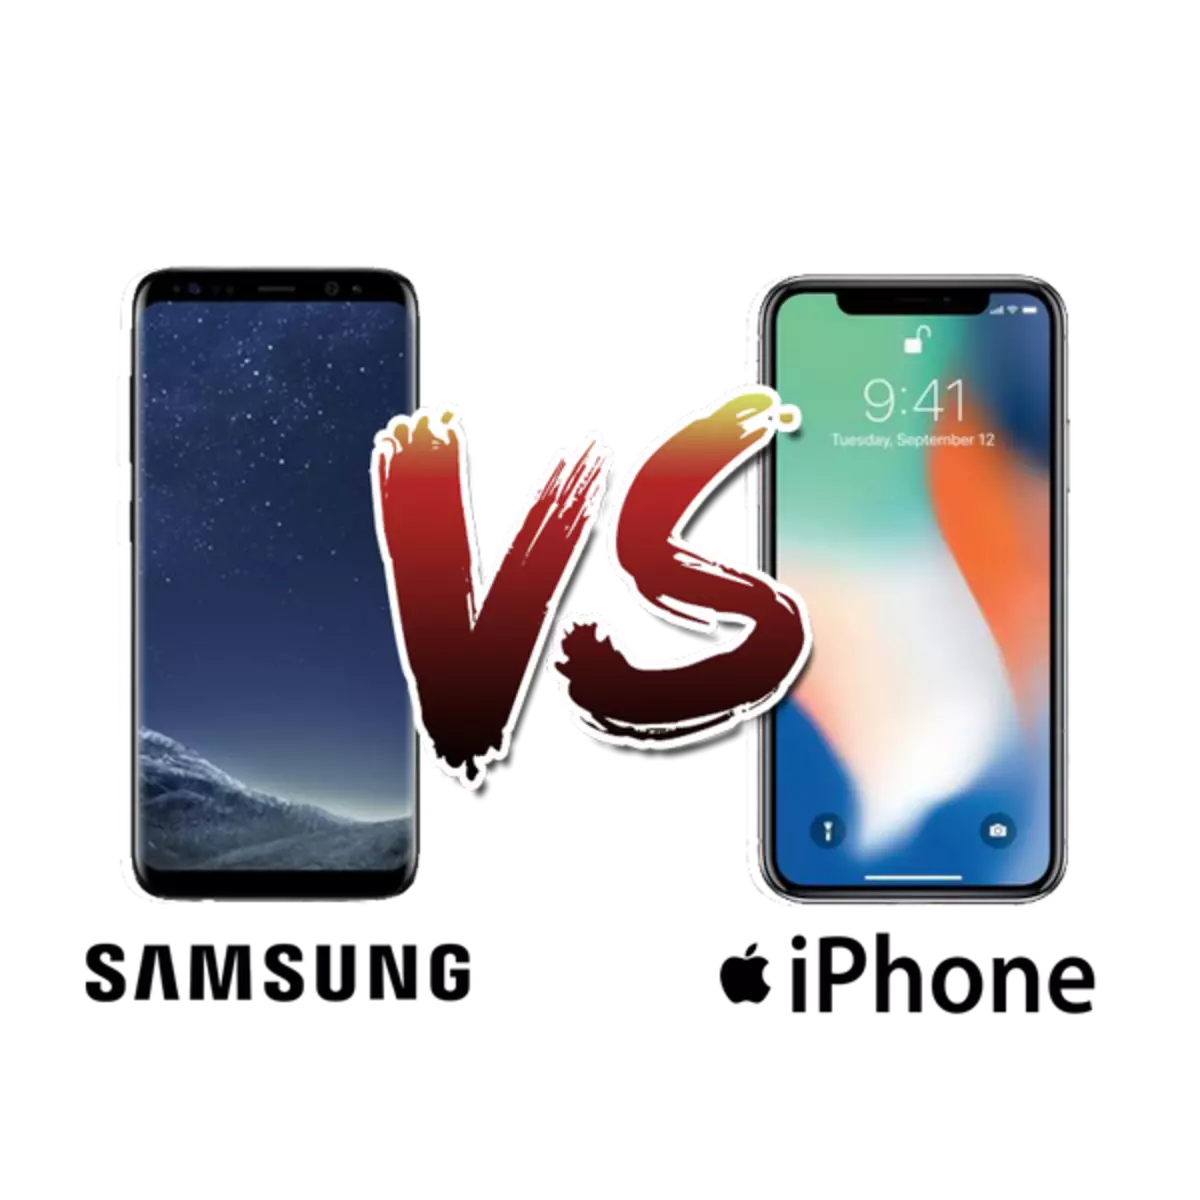 What is better: iPhone or Samsung